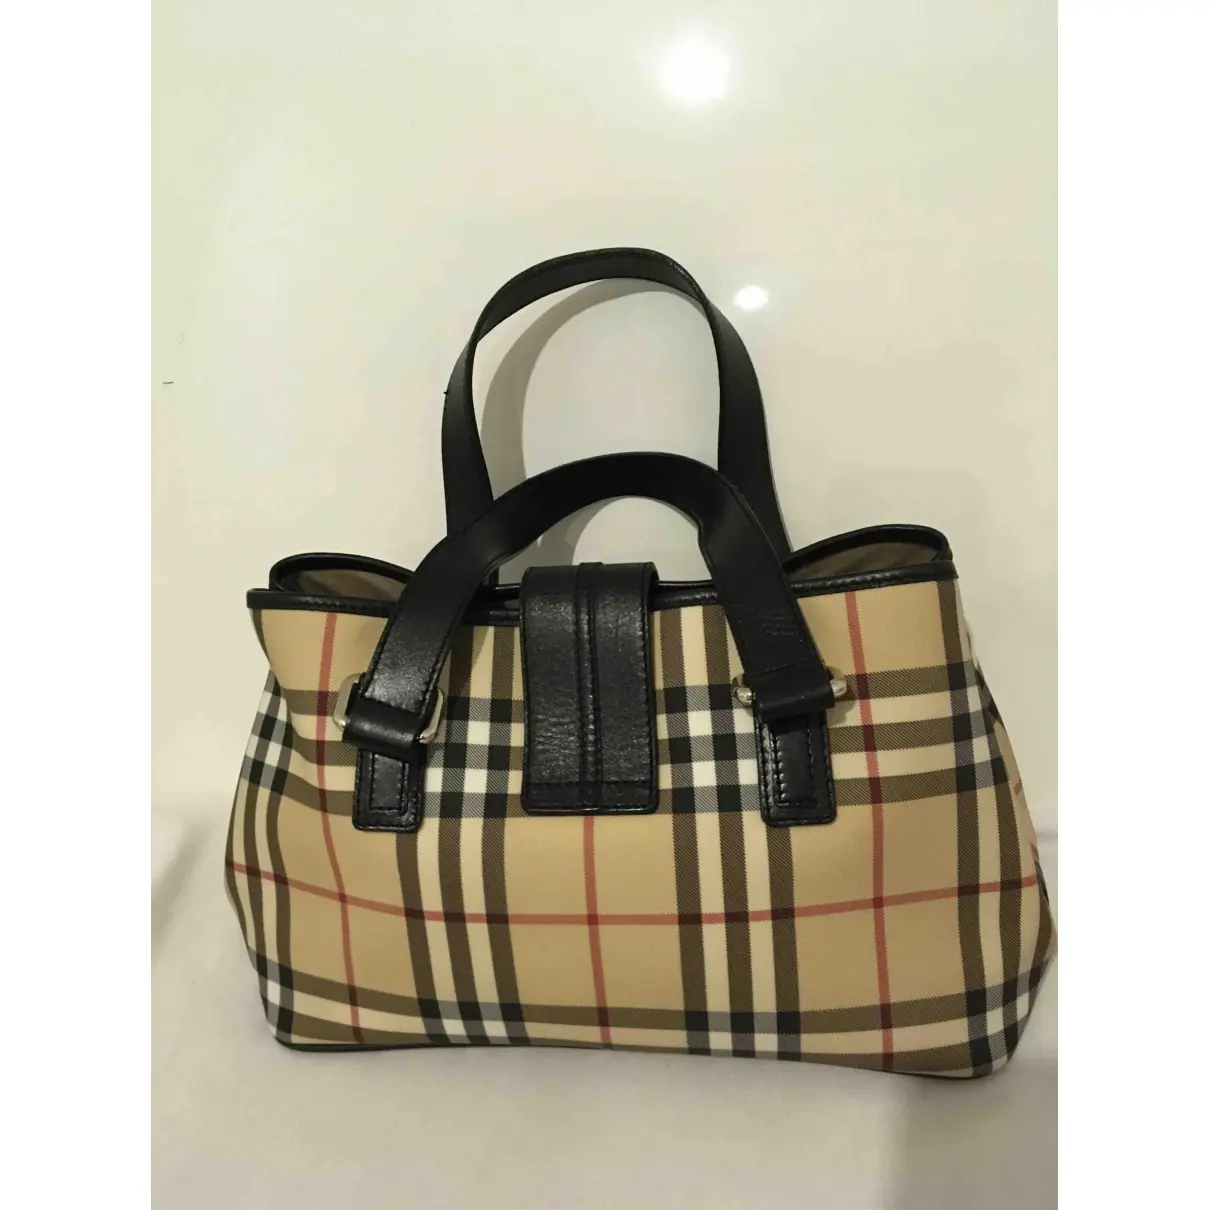 Buy Burberry Leather bag online